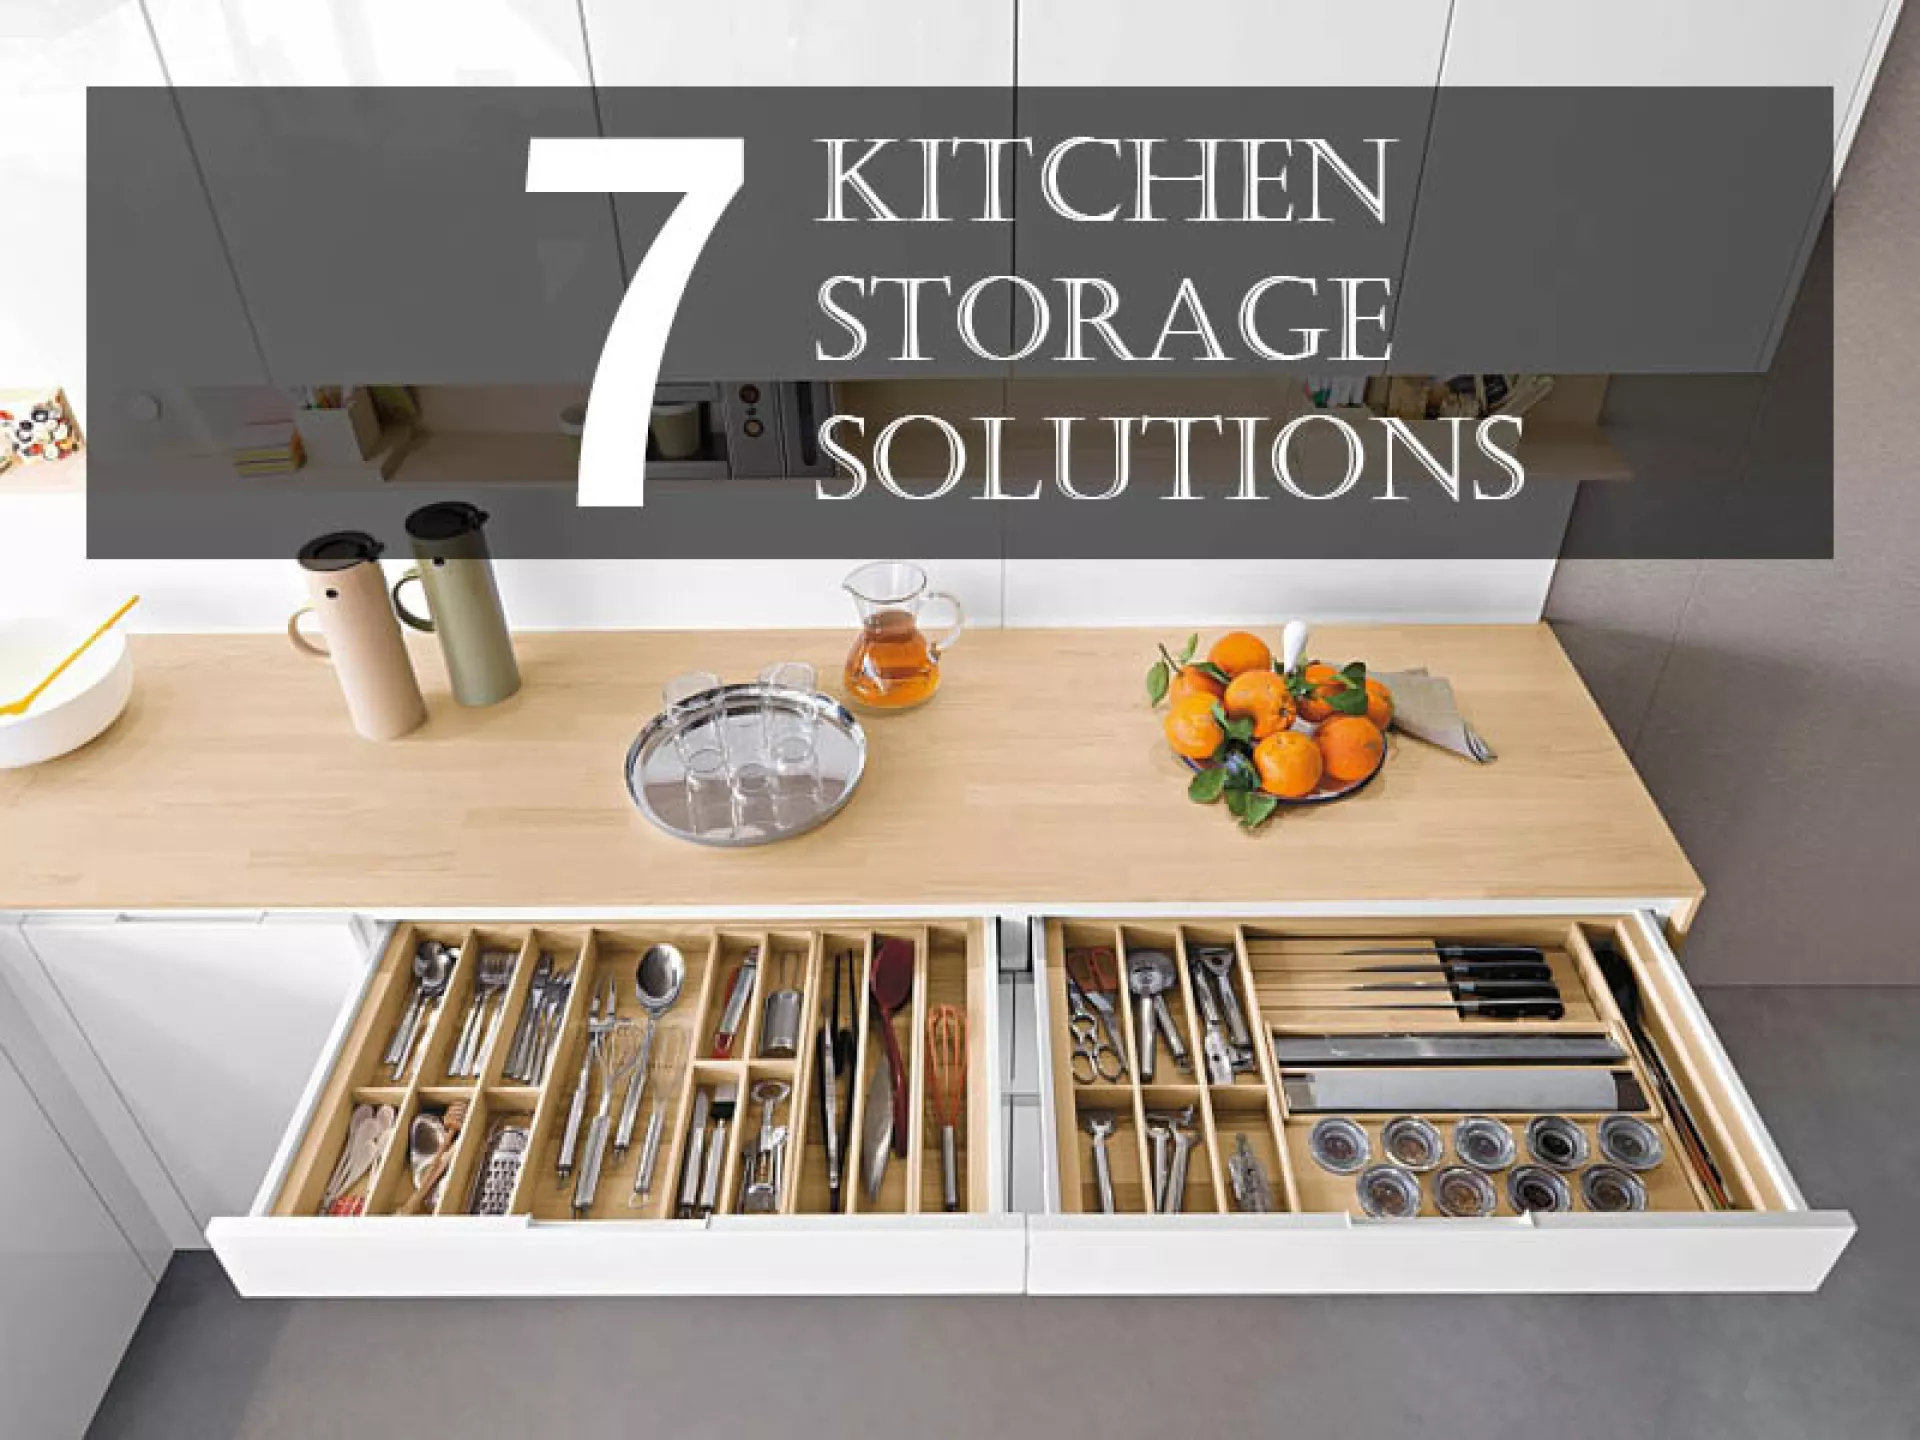 https://www.kitchenkraftinc.com/img/containers/assets/blog/imported/seven-storage-solutions-title.jpg/caacd7d04abaca809eff1cc529c7dca0.webp